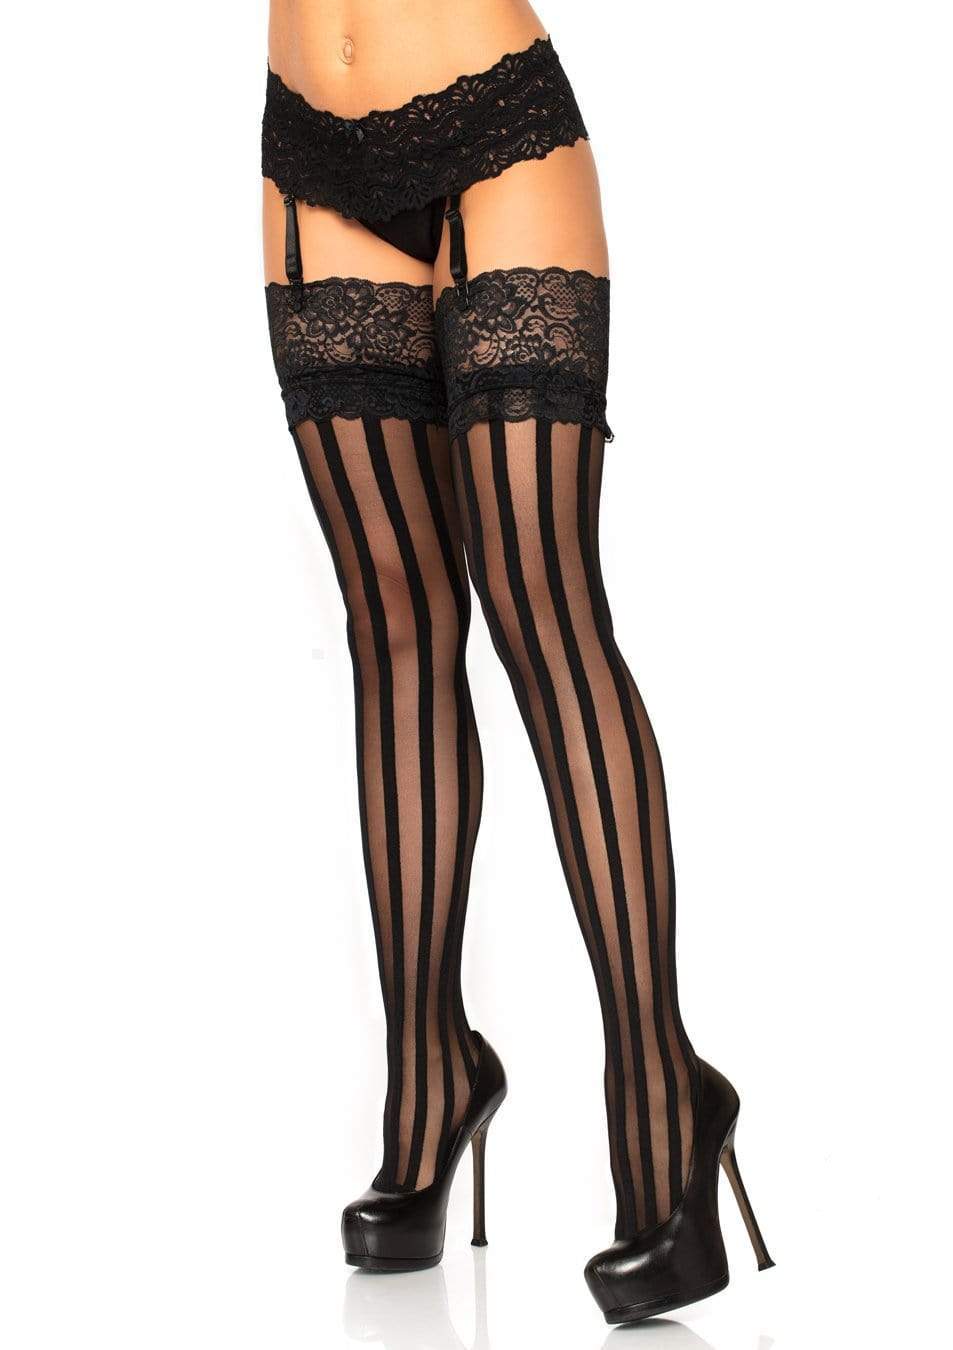 Leg Avenue Spandex Vertical Striped Stockings with 5 inch lace top